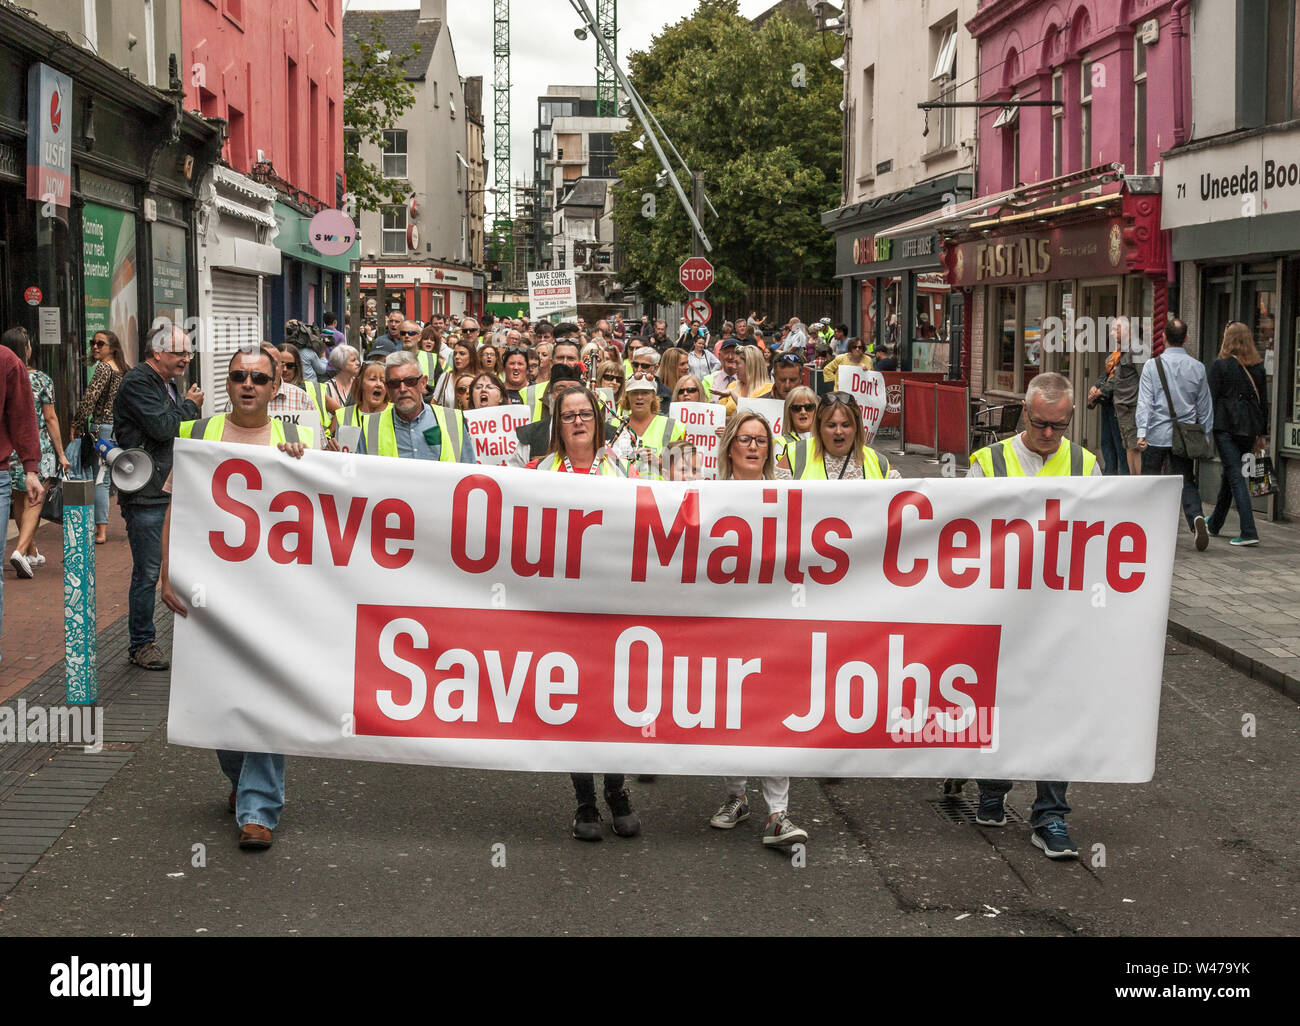 Cork City, Cork, Ireland. 20th July, 2019. Postal workers march in protest against the proposed closure by An Post of its distribution centre in Little Island with the loss of 250 jobs, on the streets of Cork, Ireland. -Credit;  David Creedon / Alamy Live News Stock Photo